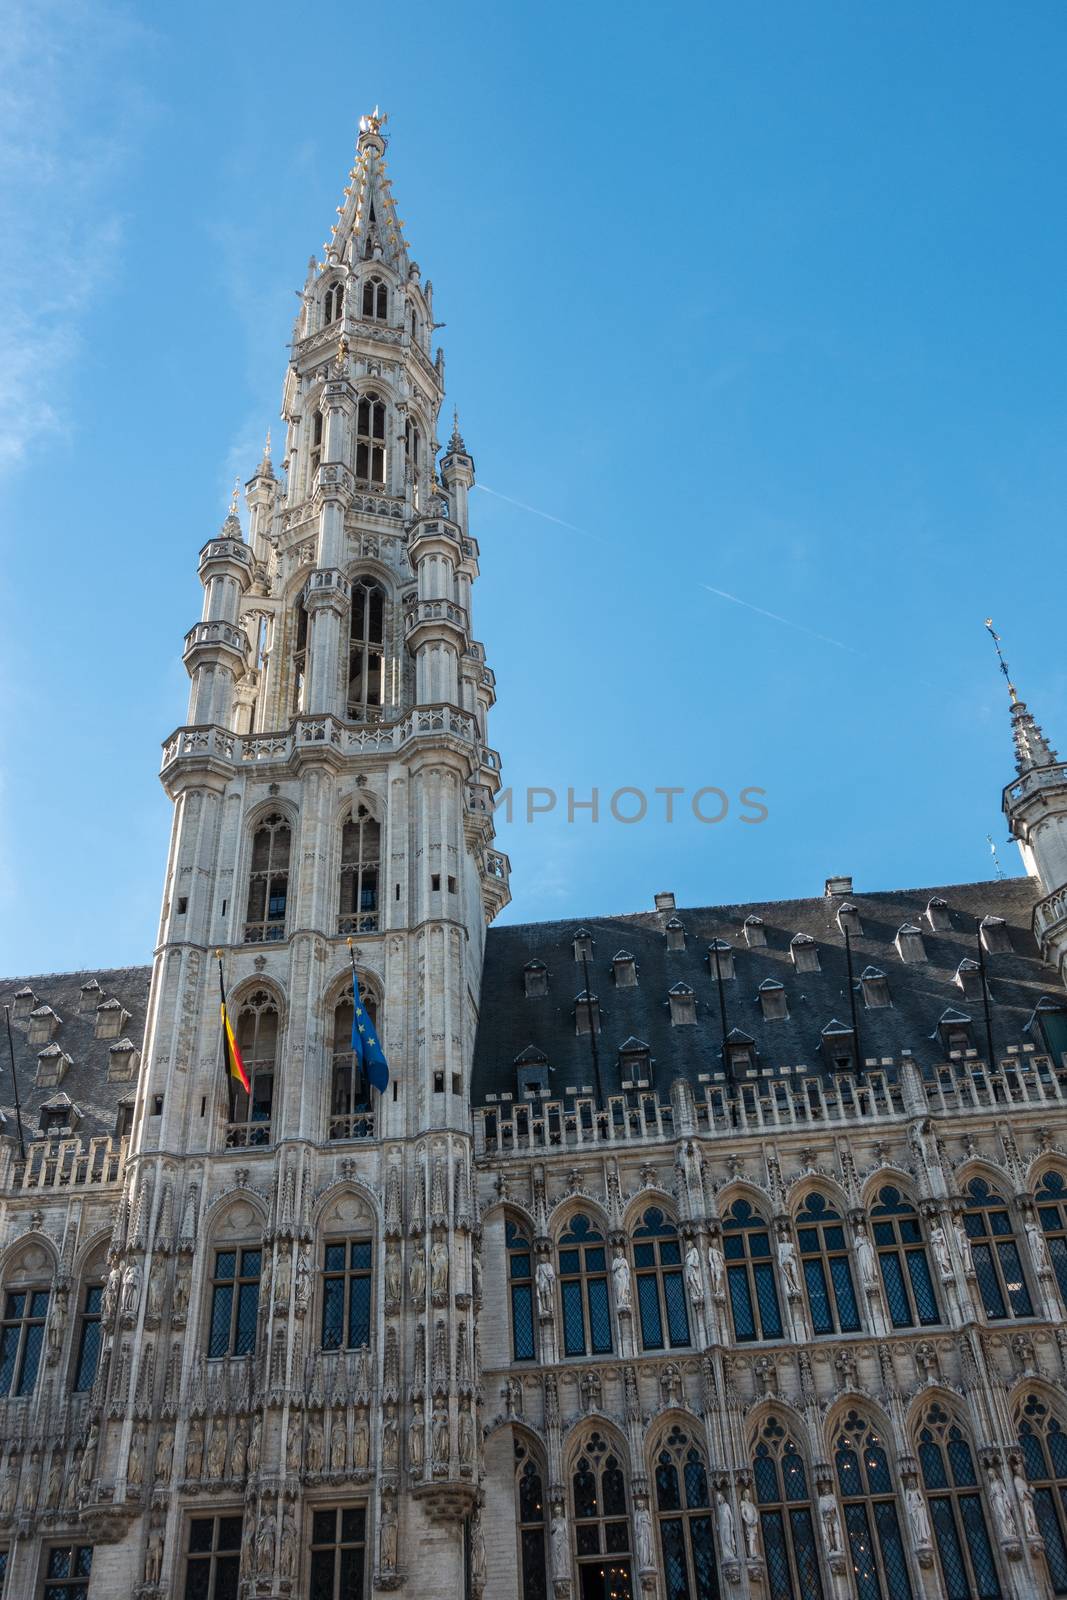 Brussels, Belgium - September 26, 2018: Spire and facade of gray stone town hall with statues and against blue sky.